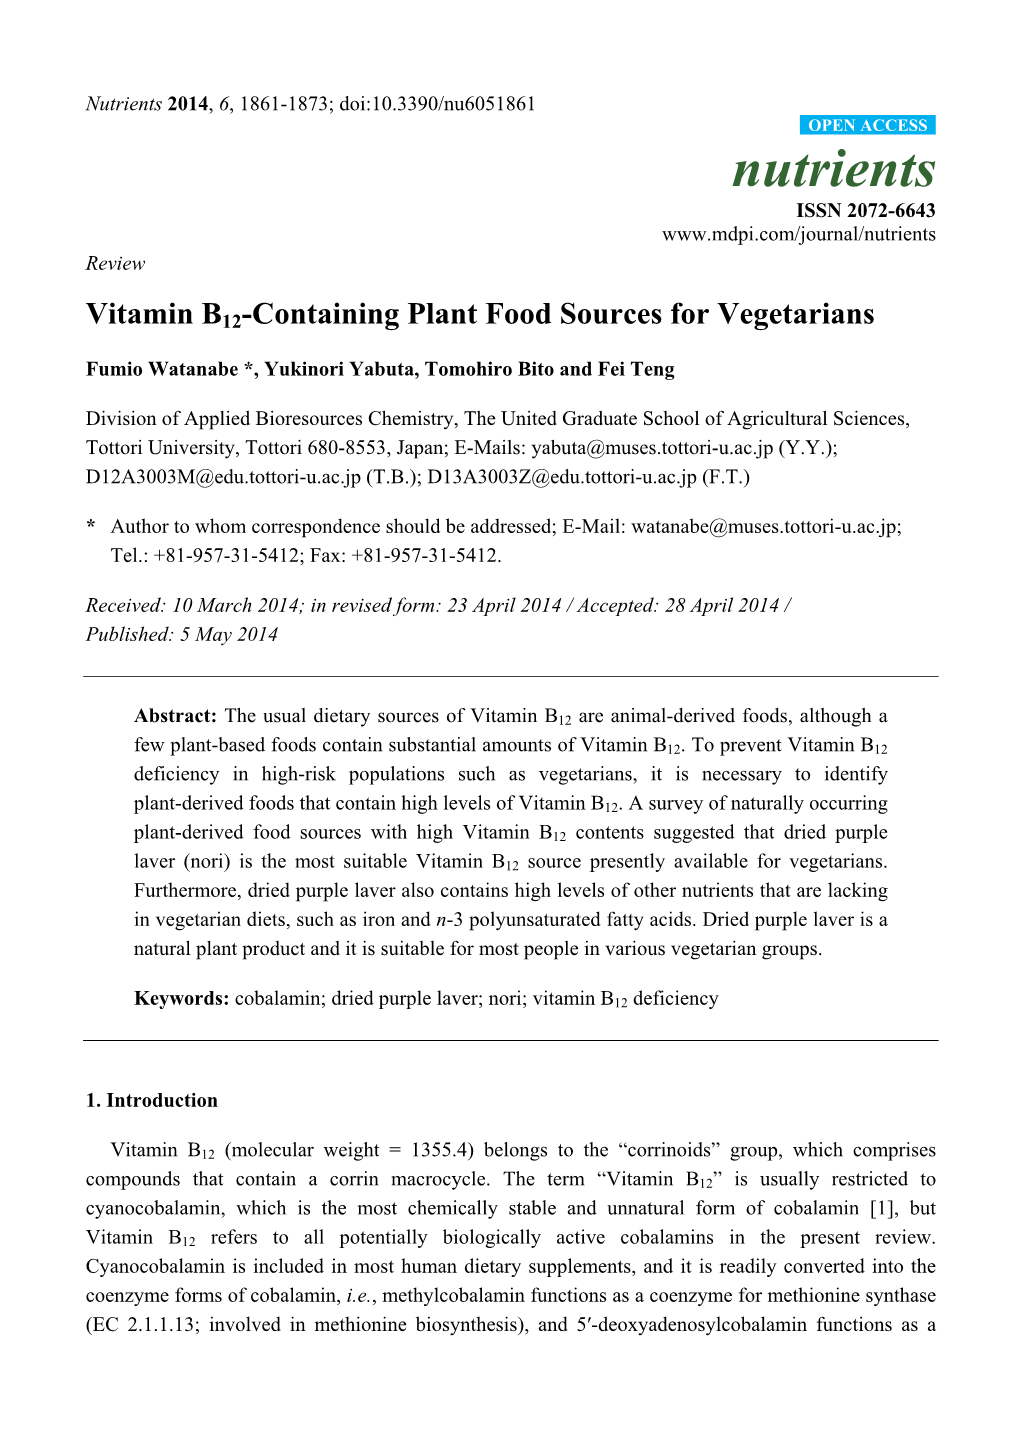 Vitamin B12-Containing Plant Food Sources for Vegetarians